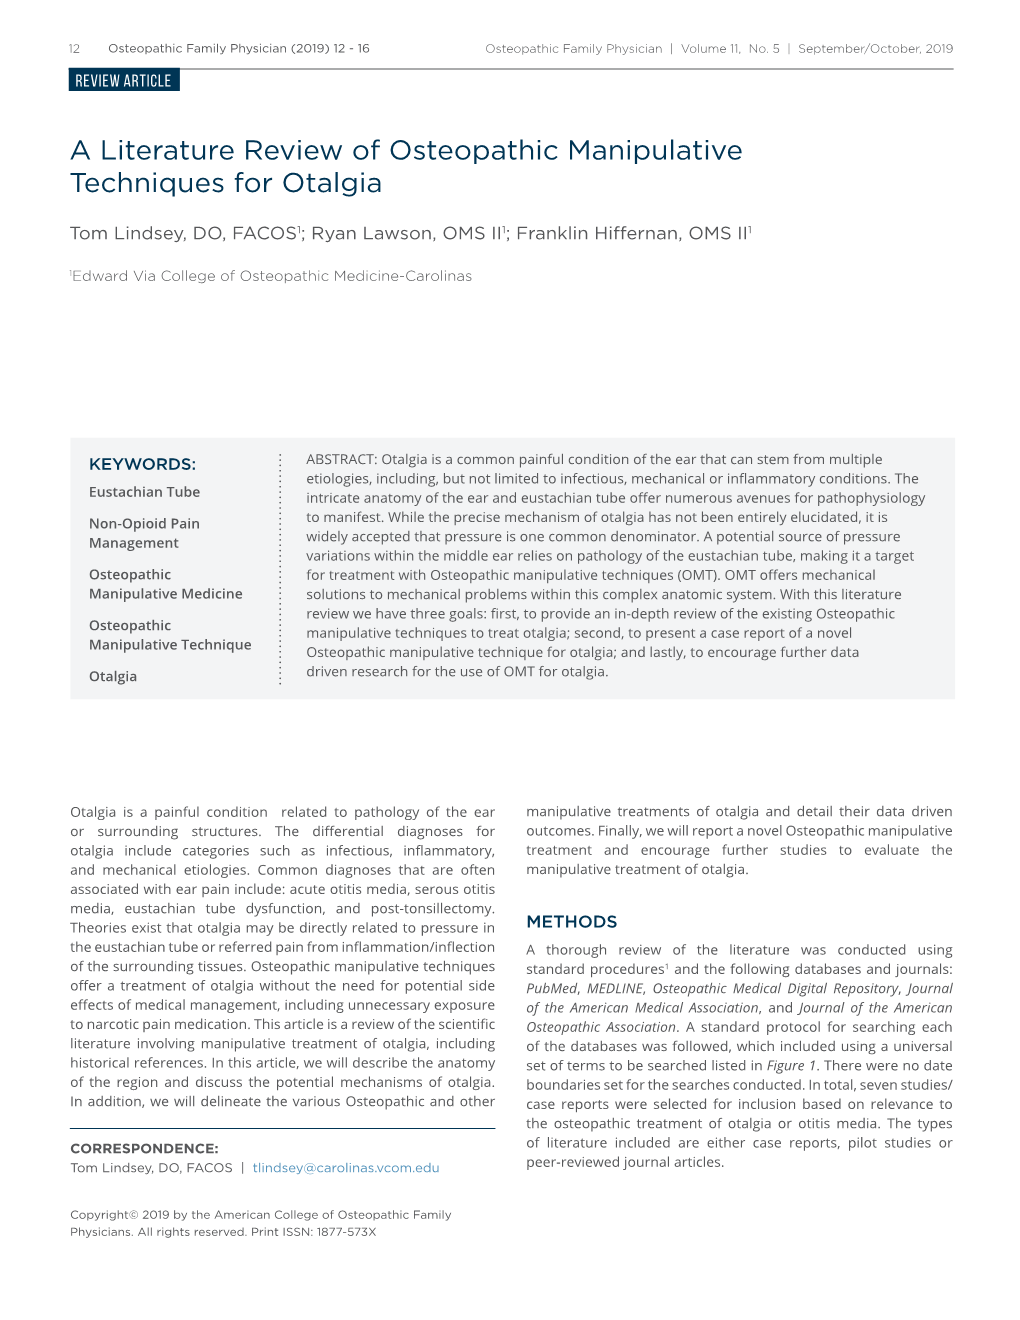 A Literature Review of Osteopathic Manipulative Techniques for Otalgia